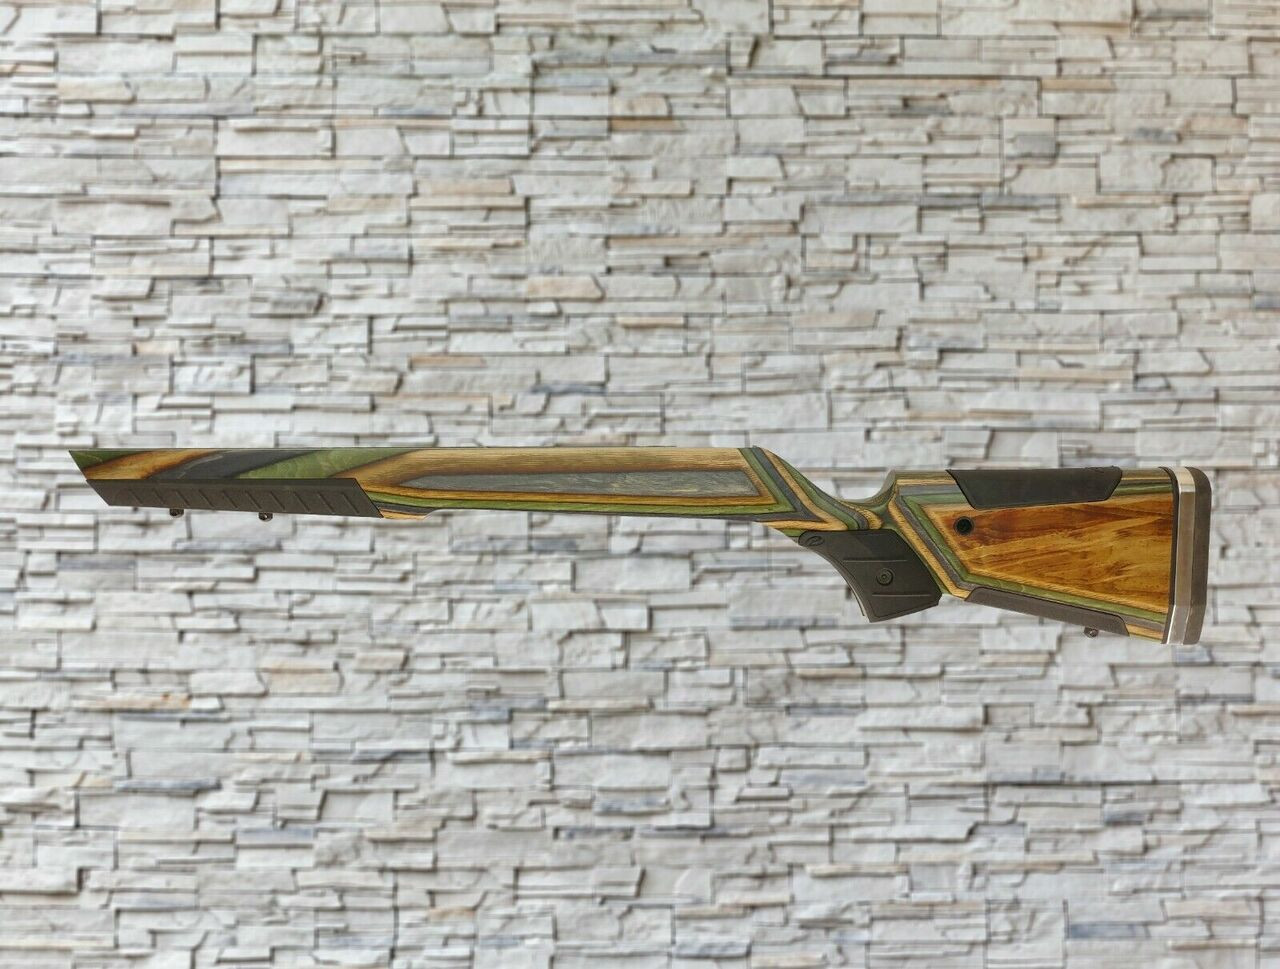 Boyds At-One Adjustable Camo Stock Savage 93E/93R/MKII Factory Barrel Rifle